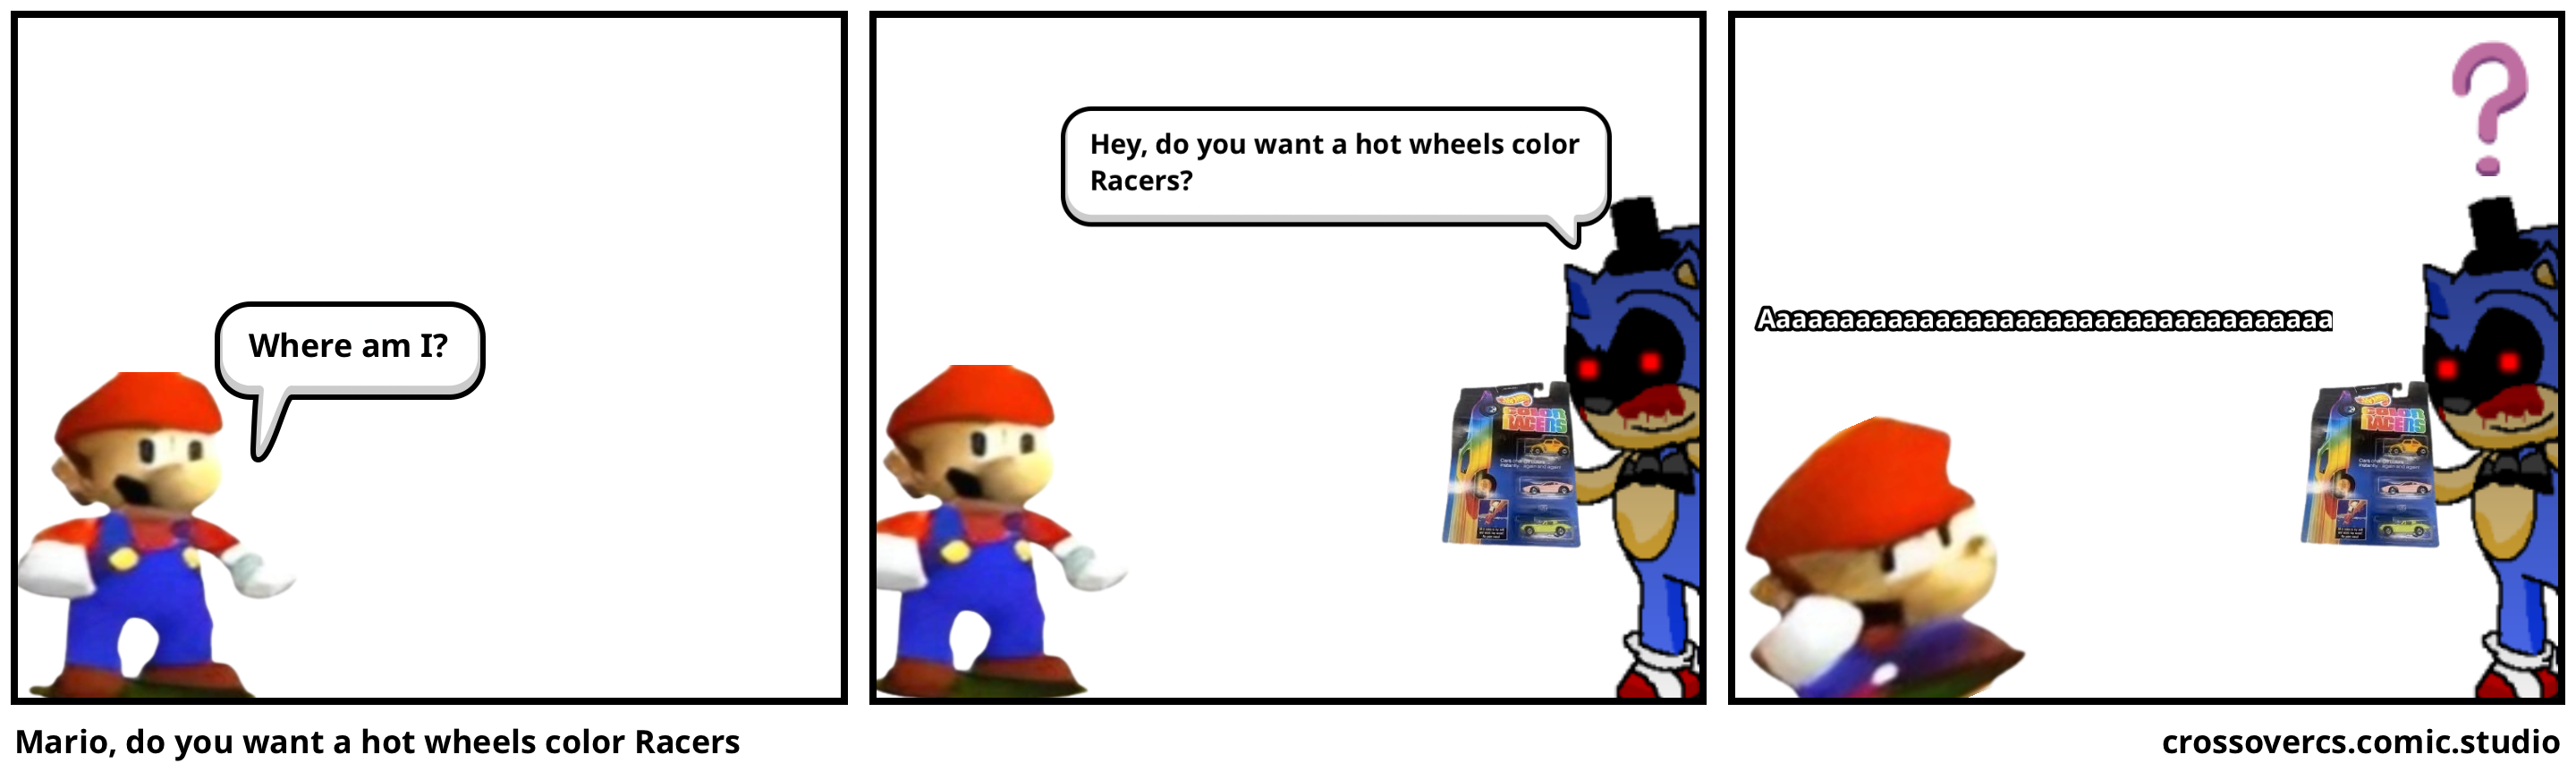 Mario, do you want a hot wheels color Racers